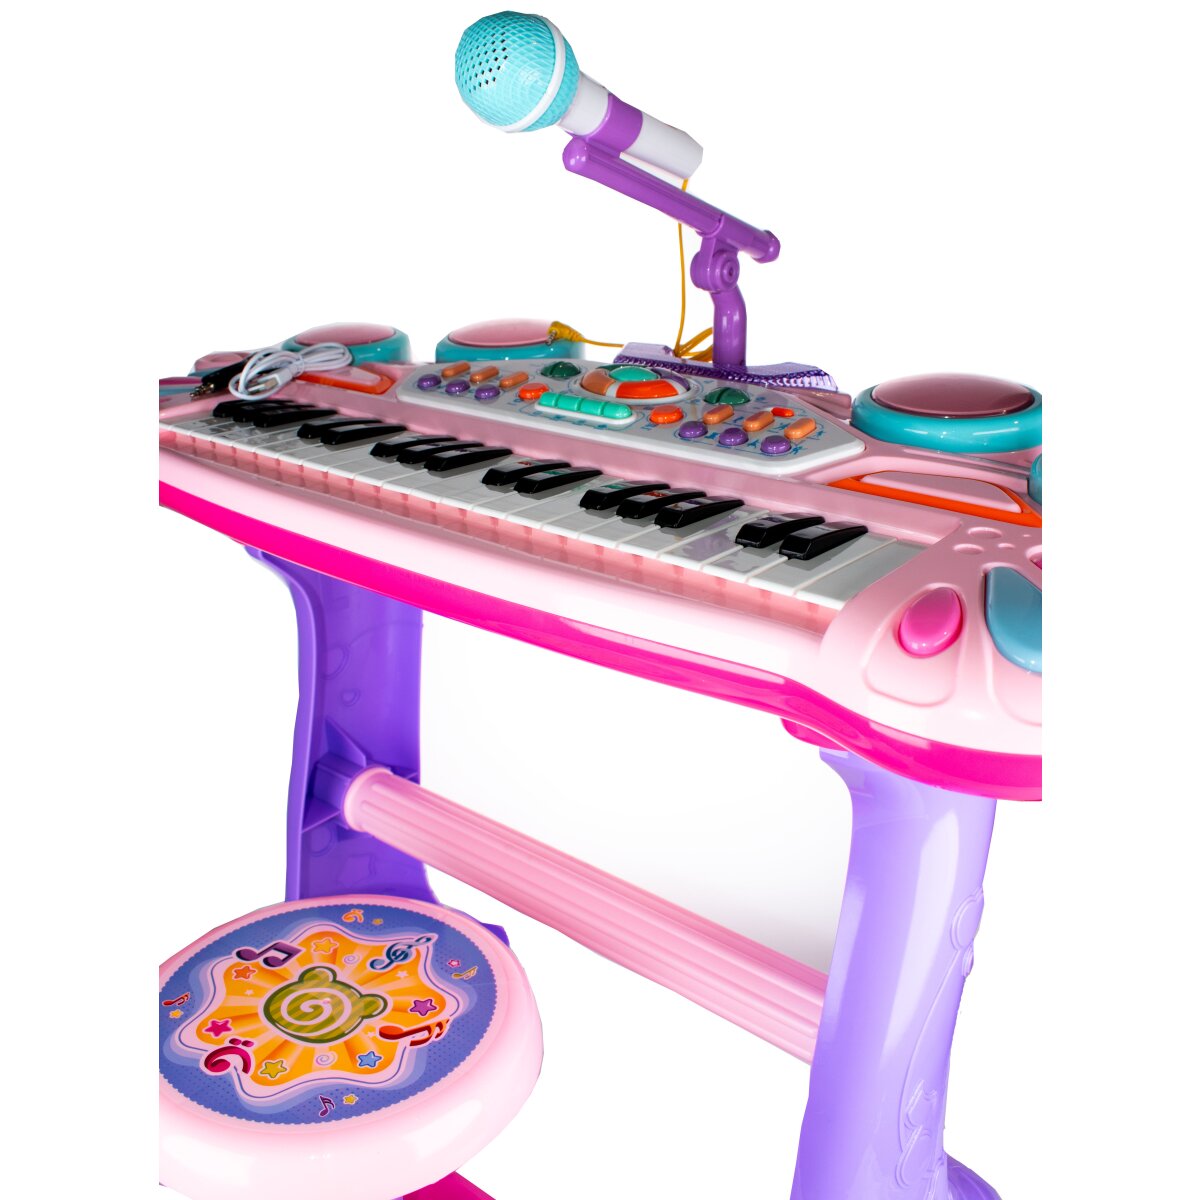 Kinder Piano | Spielzeug Instrument | Electronic Piano |...